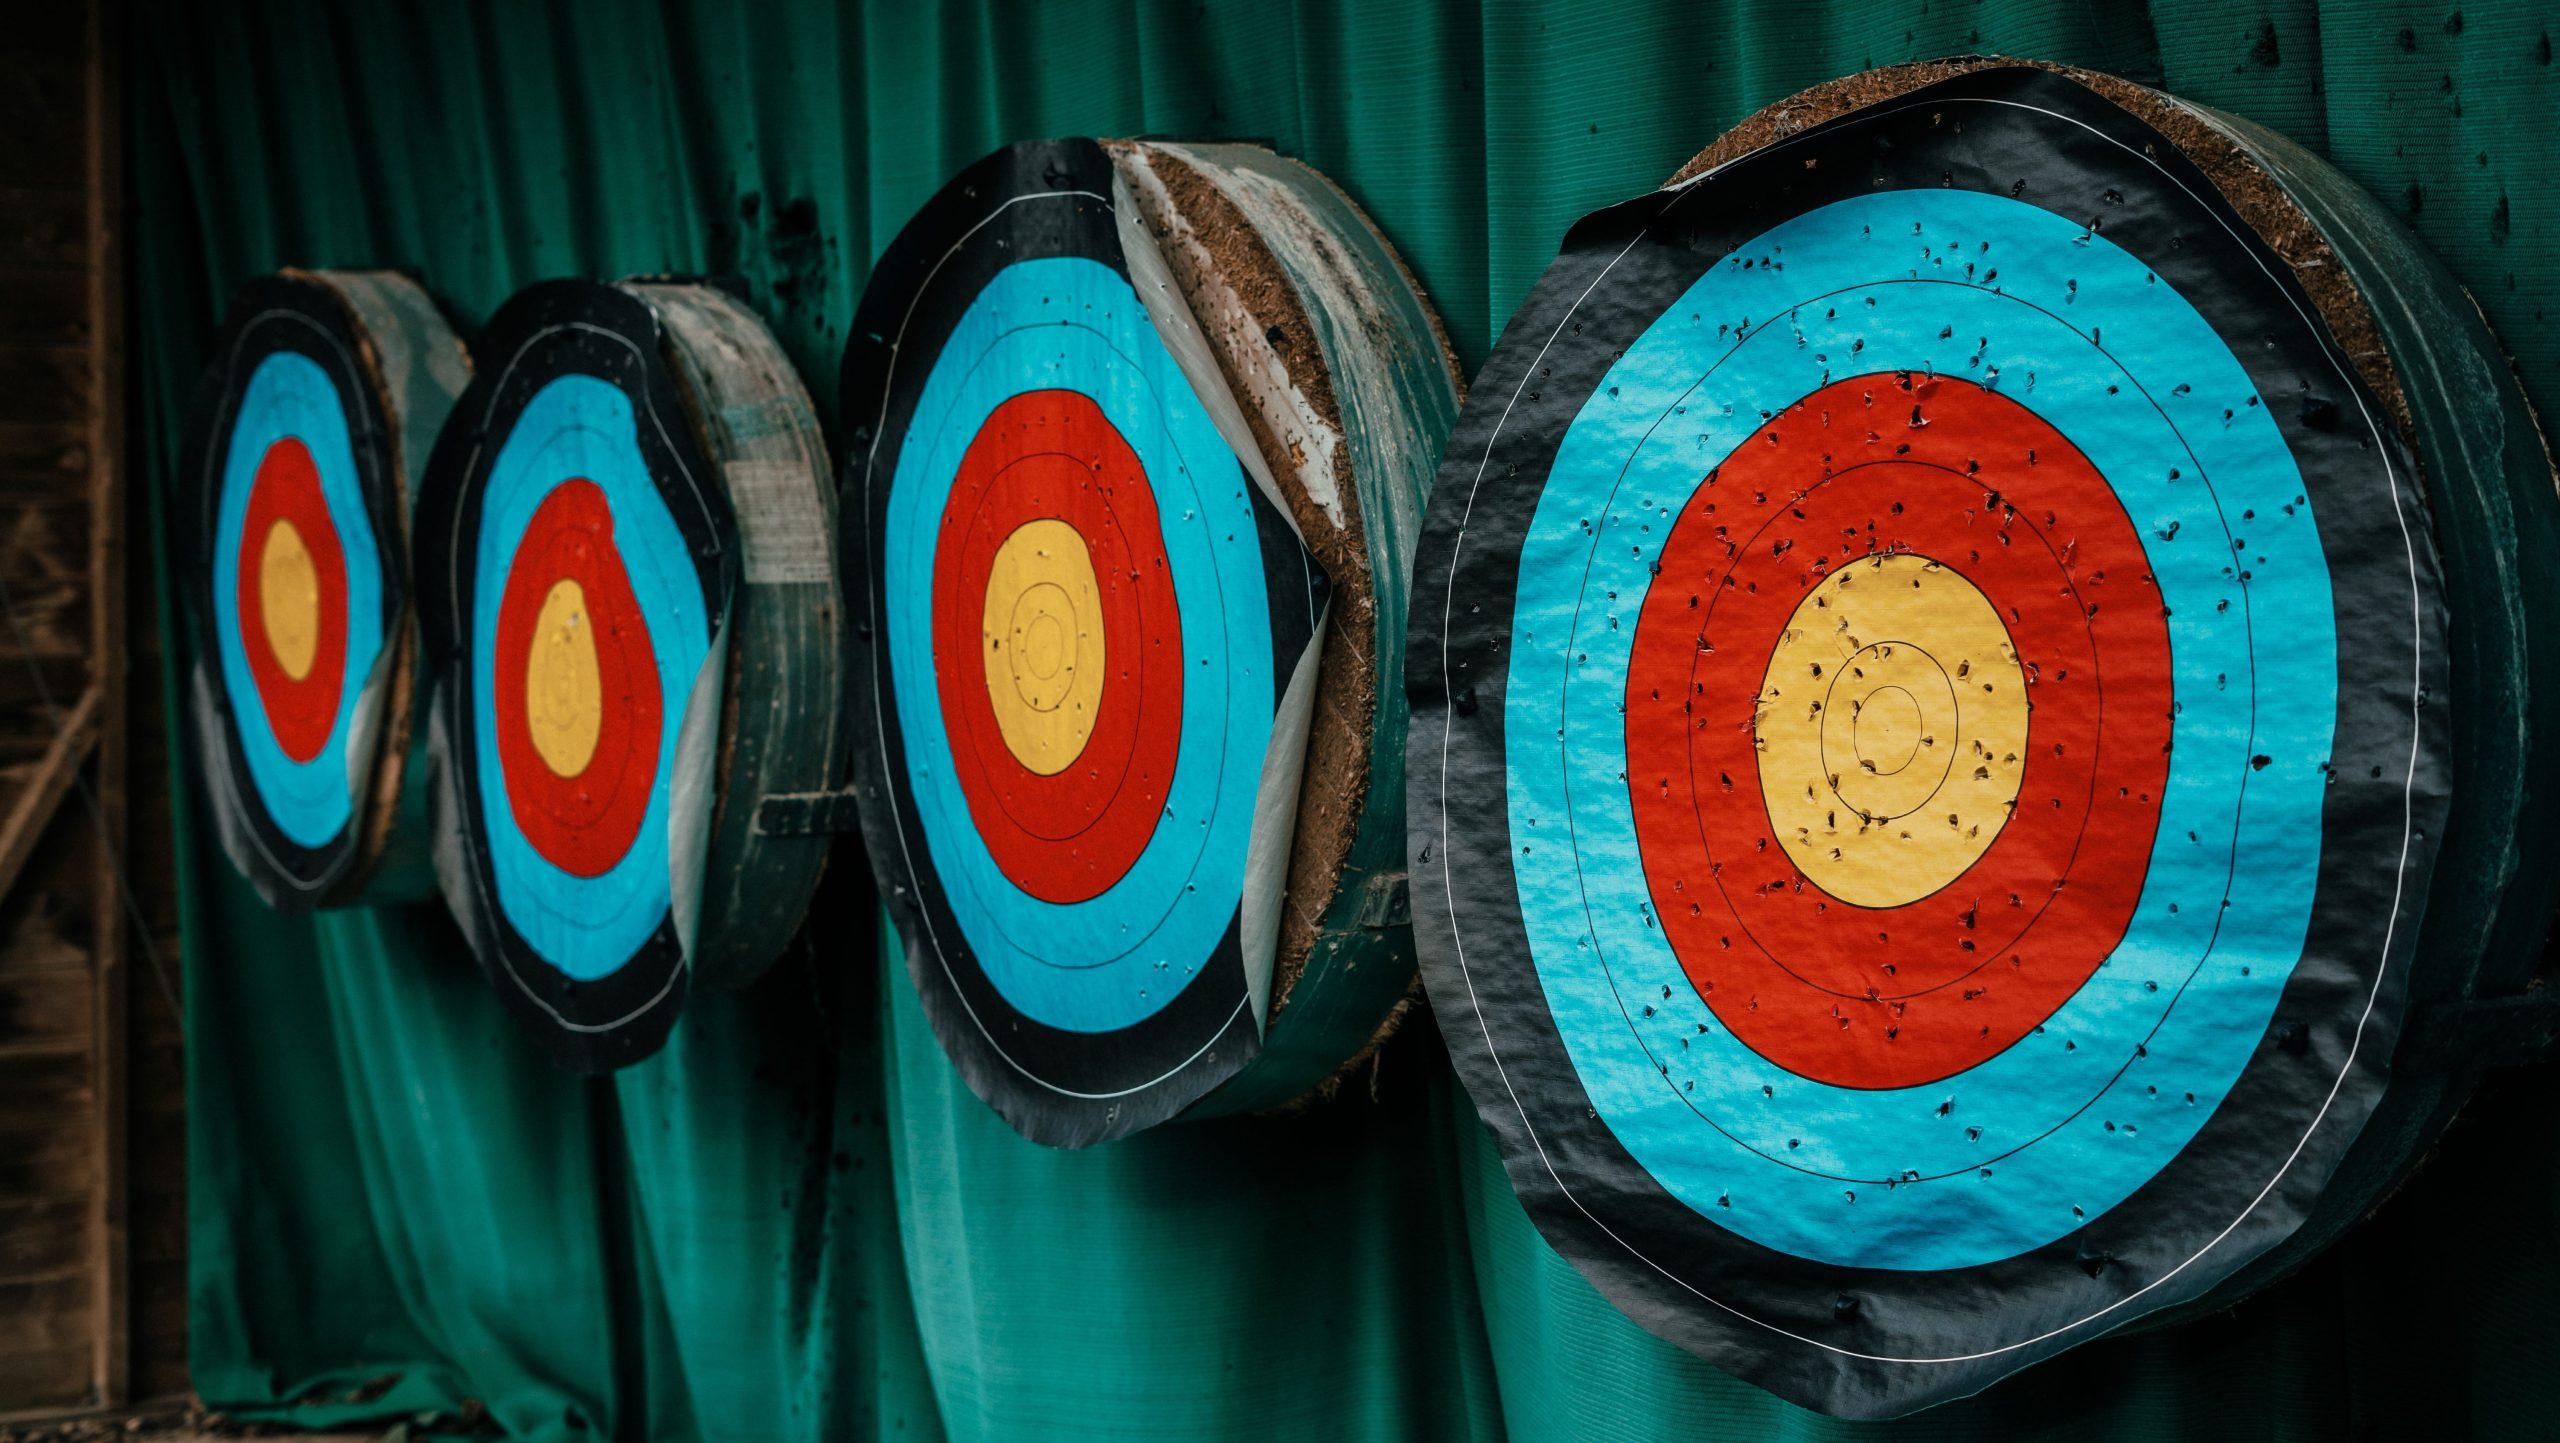 Archery targets lined up against a green curtain.